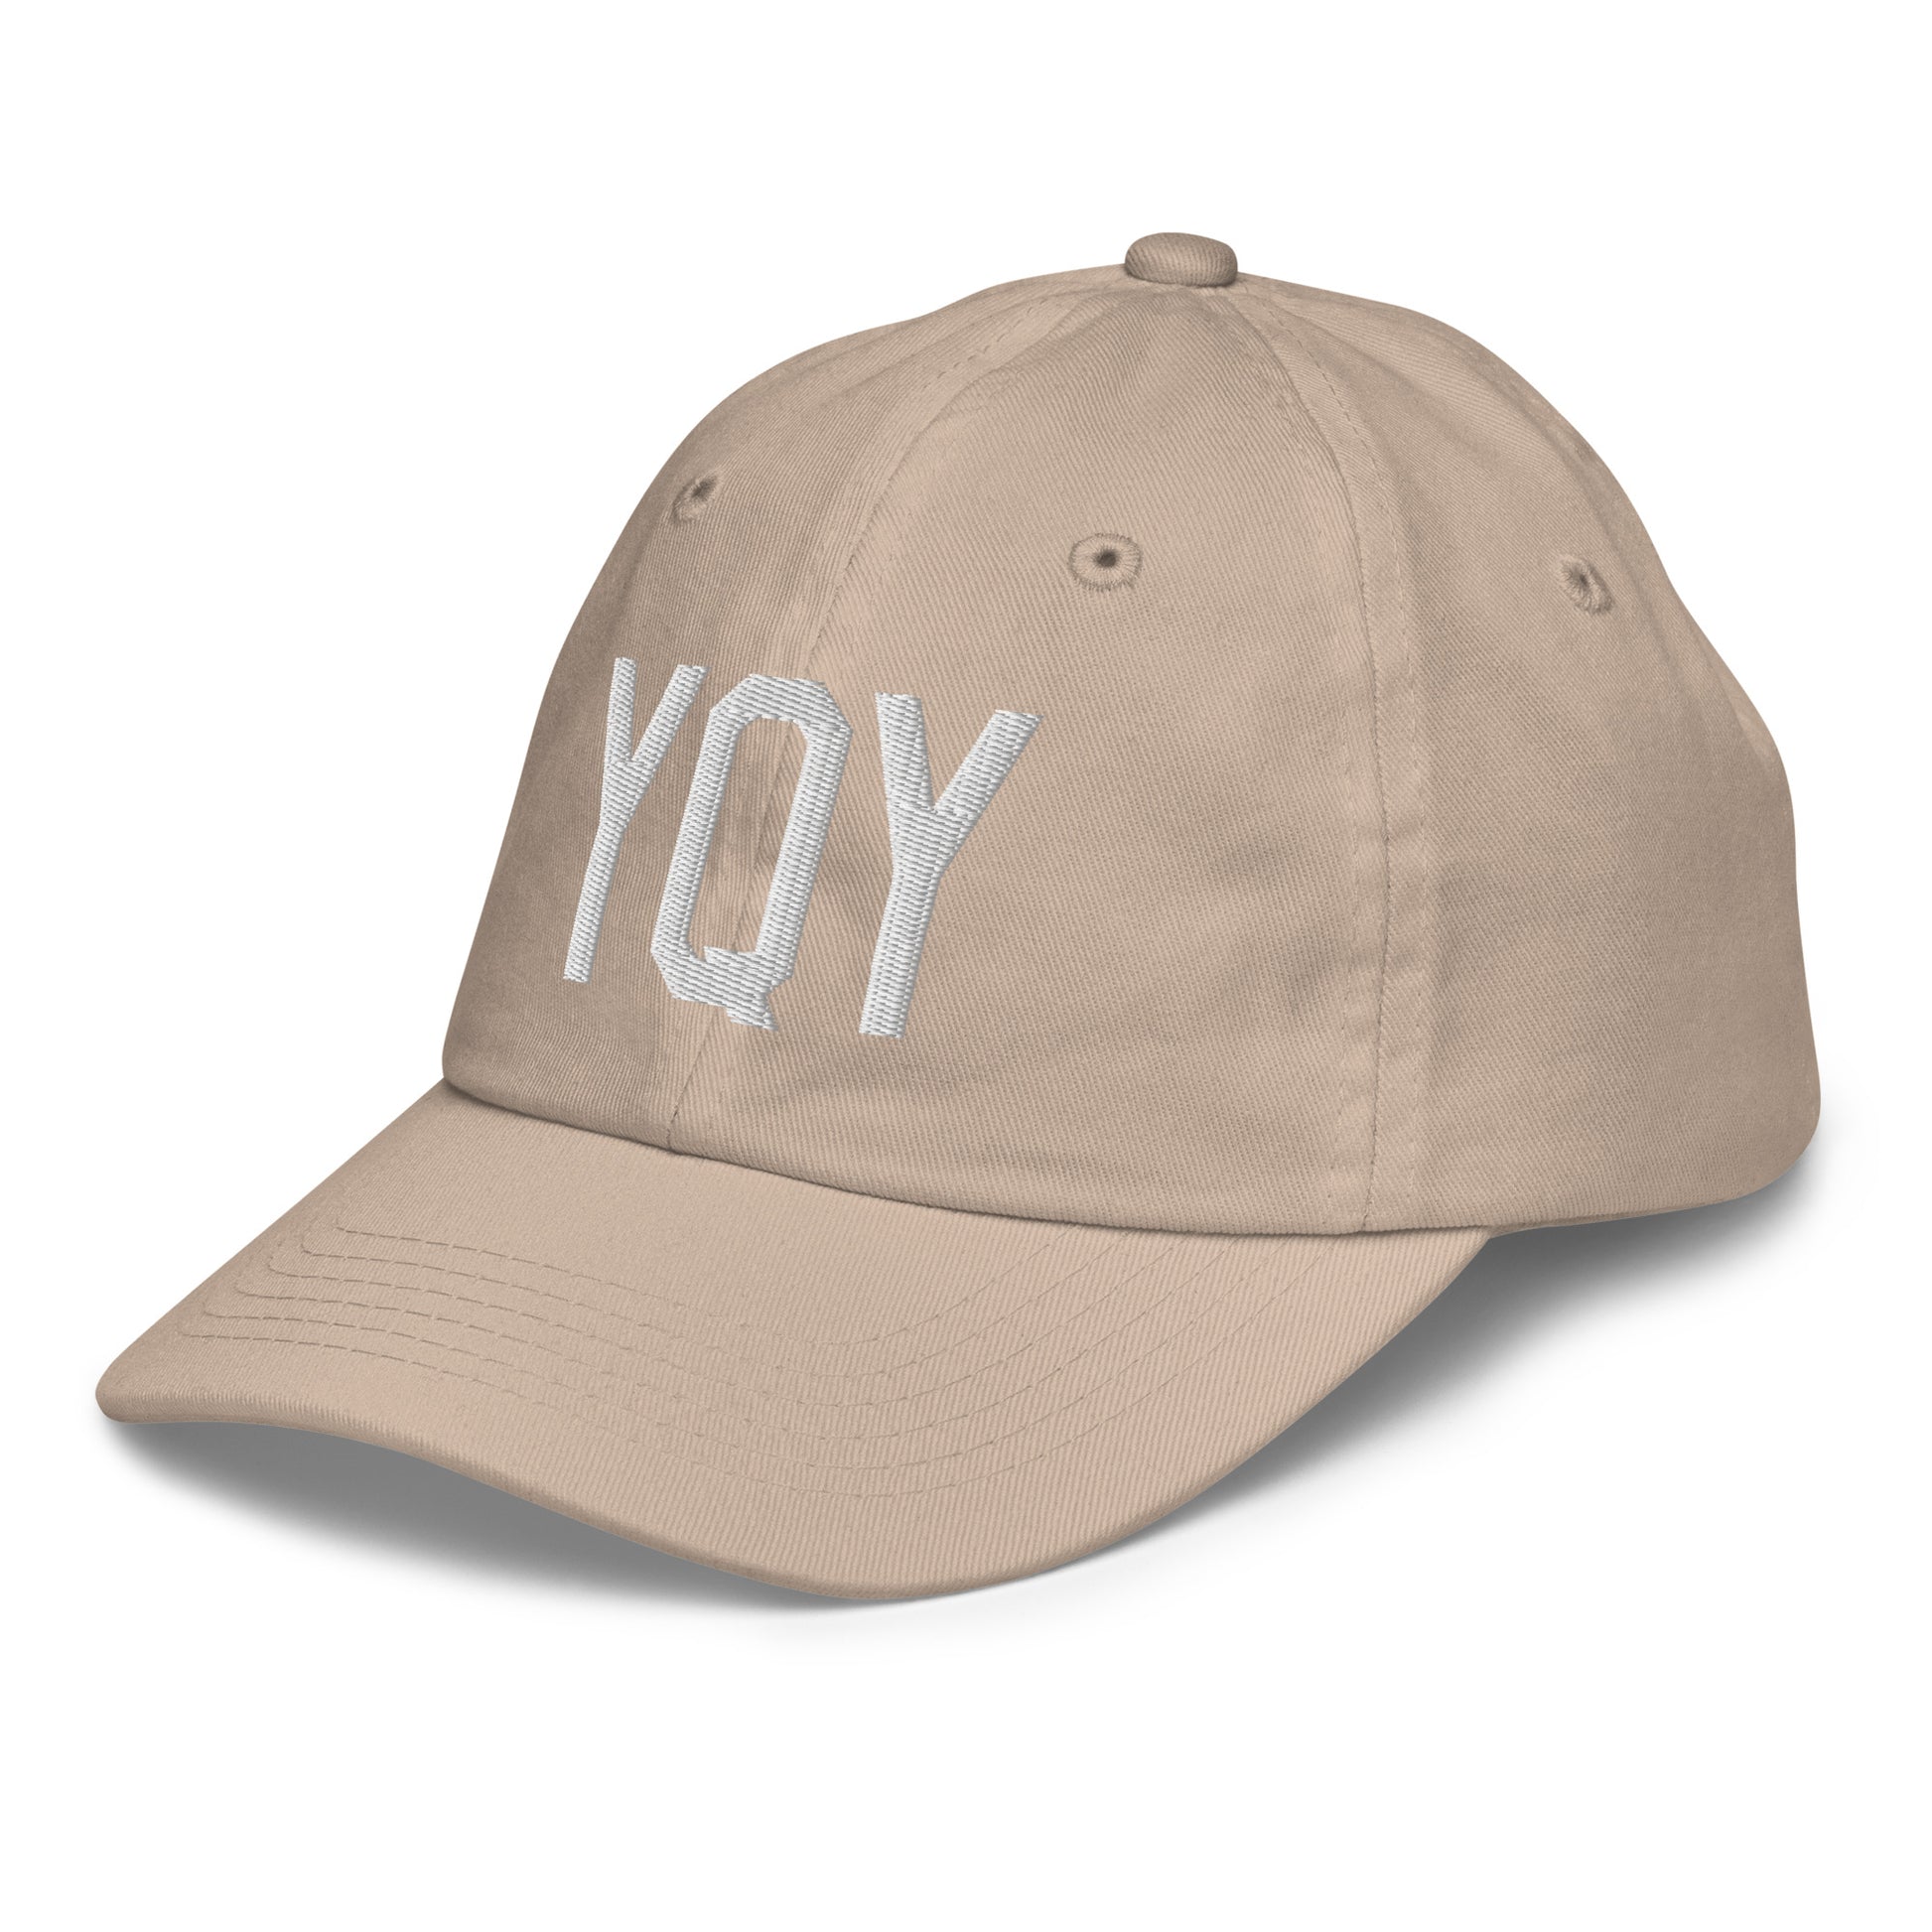 Airport Code Kid's Baseball Cap - White • YQY Sydney • YHM Designs - Image 30